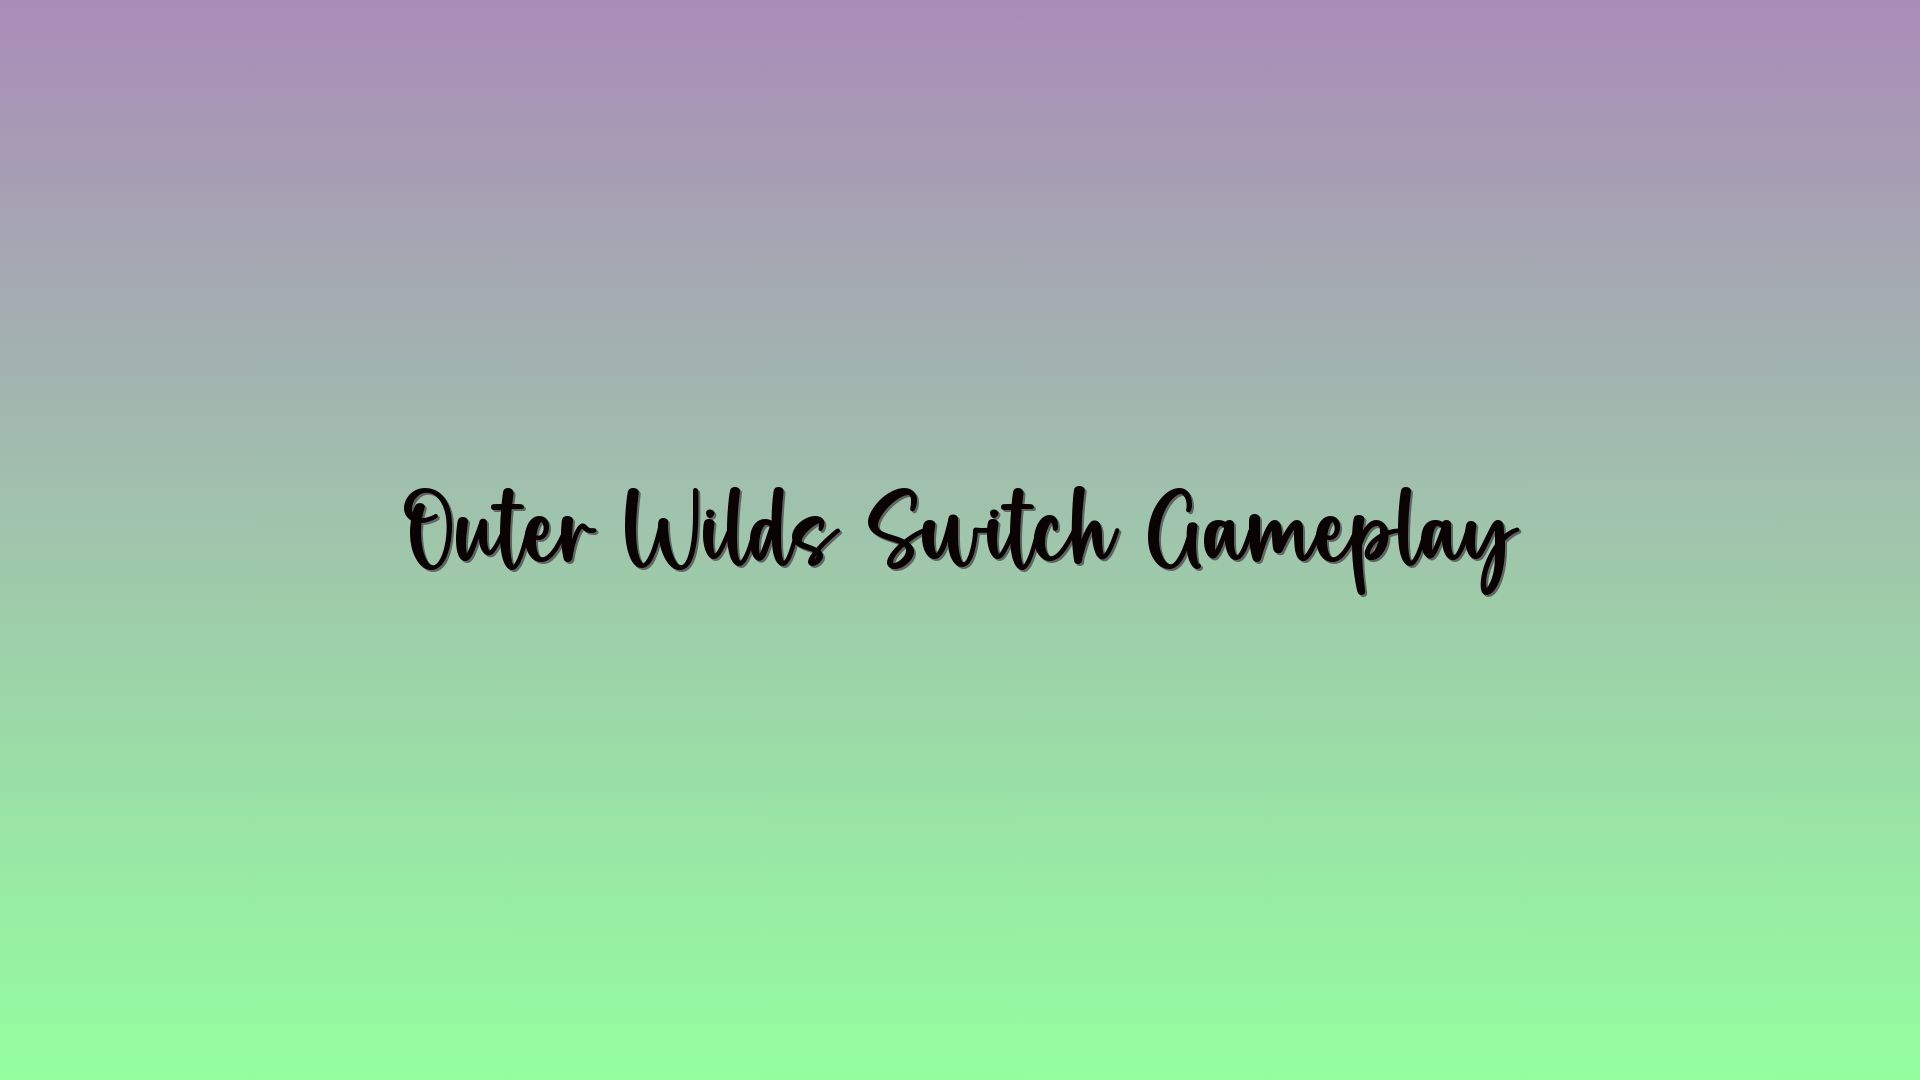 Outer Wilds Switch Gameplay